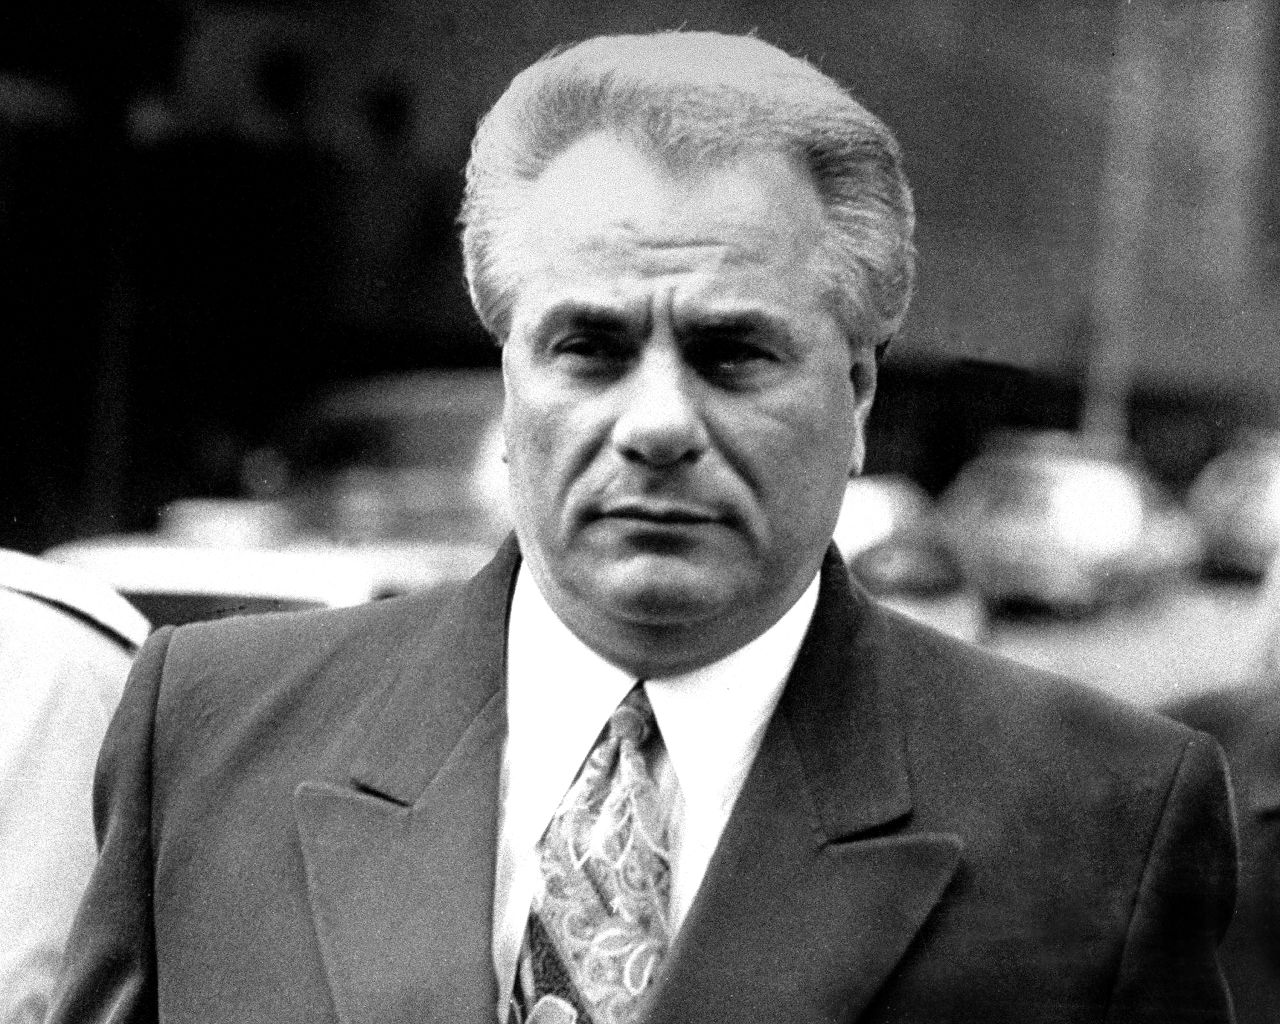 New York Mafia chief John Gotti was known as the "Dapper Don" for his expensive suits and "Teflon Don" due to government charges failing to stick in three trials. He was later convicted of murder and racketeering. He died of cancer at age 61 in 2002 while serving a life sentence.